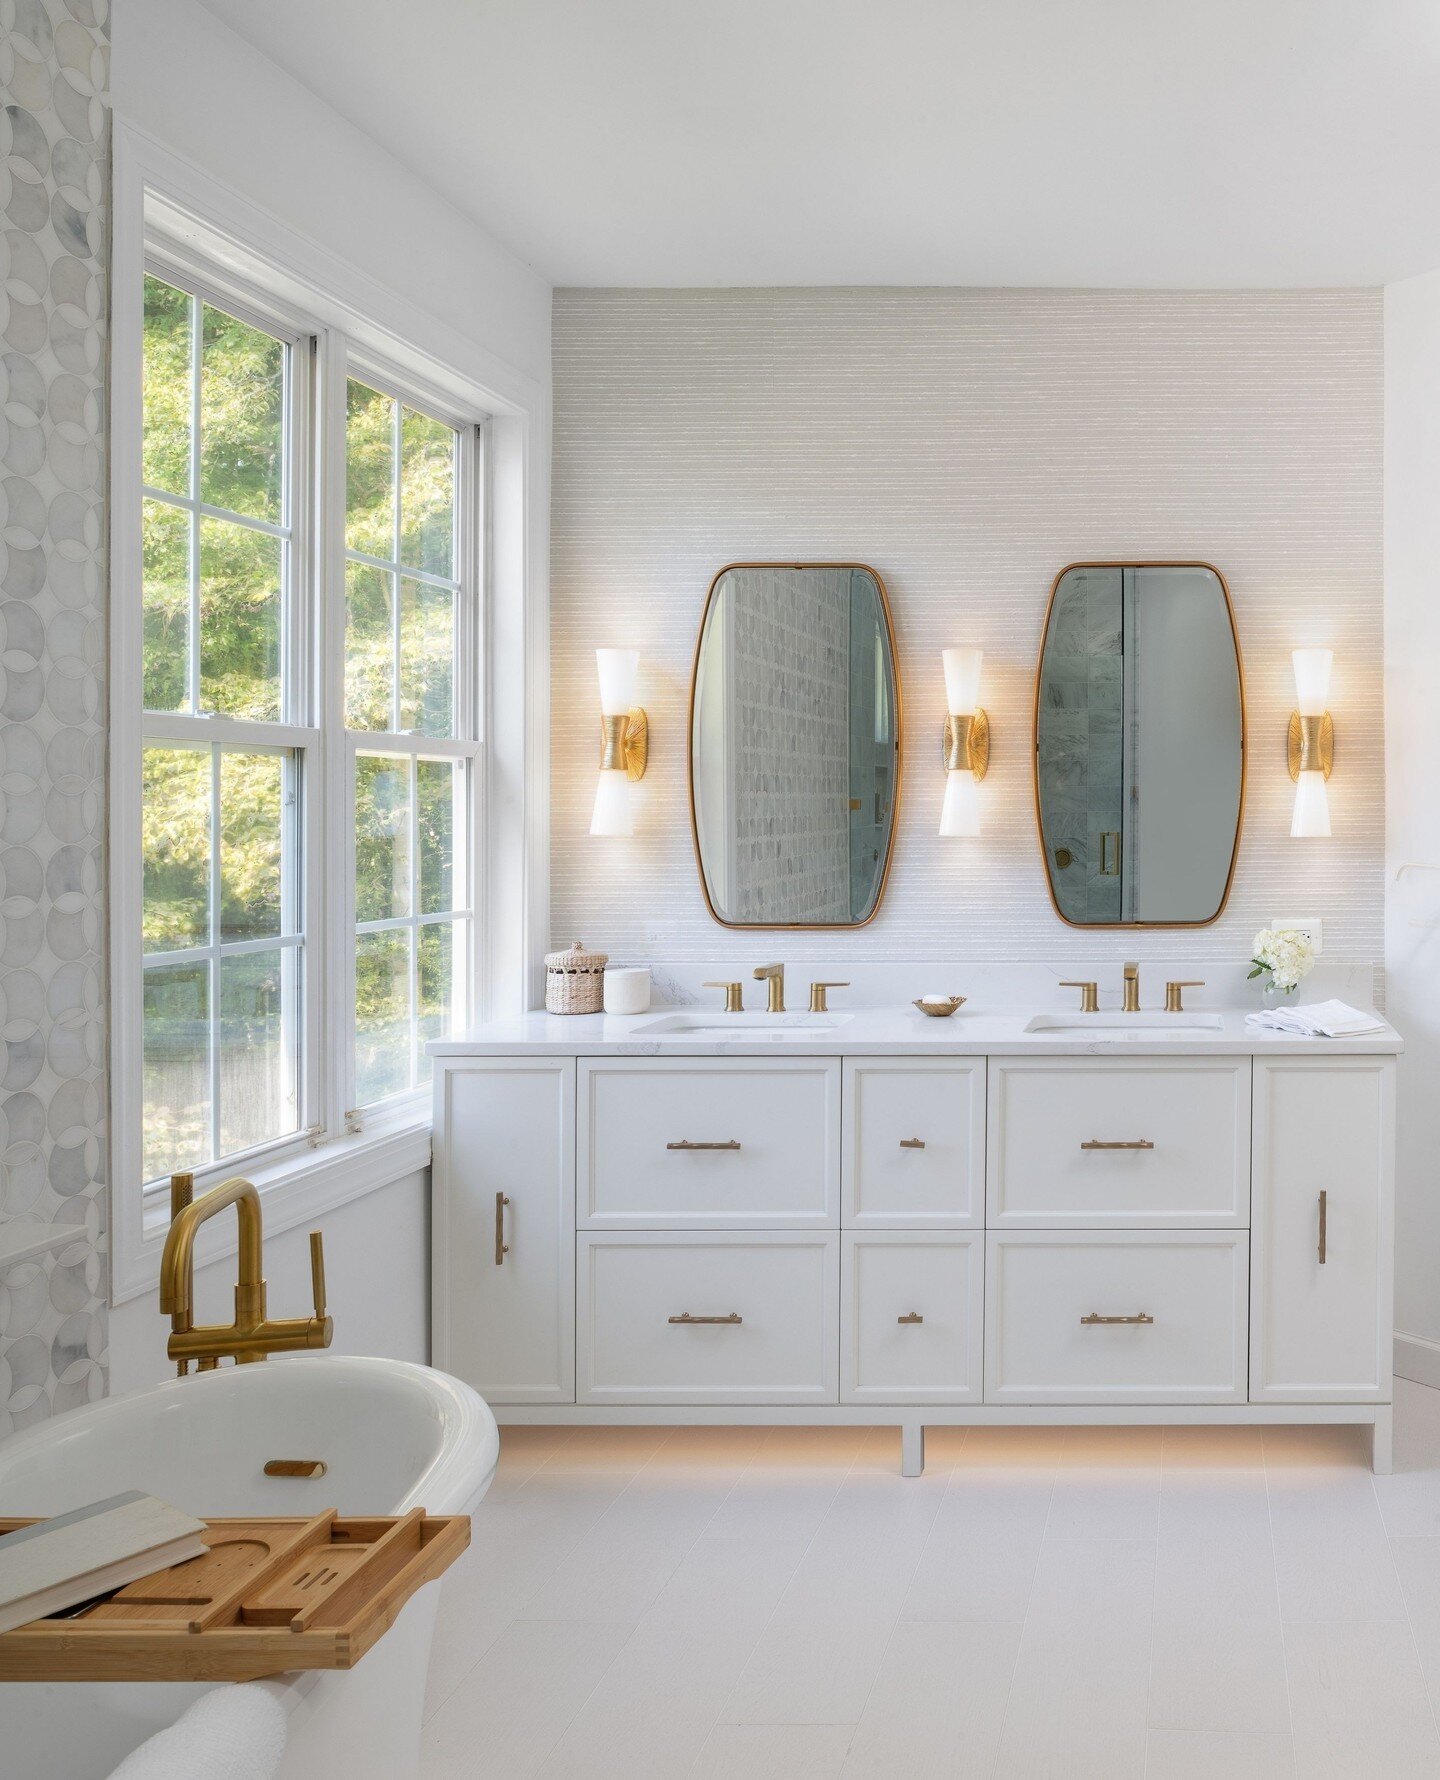 Step into luxury with our bright, clean, and oh-so-luxurious primary bathroom. A spa-like haven awaits, inviting you to unwind and relax after a long work week. Discover the perfect balance of elegance and charm in every corner.⁠
⁠
📸: @radiferaphoto